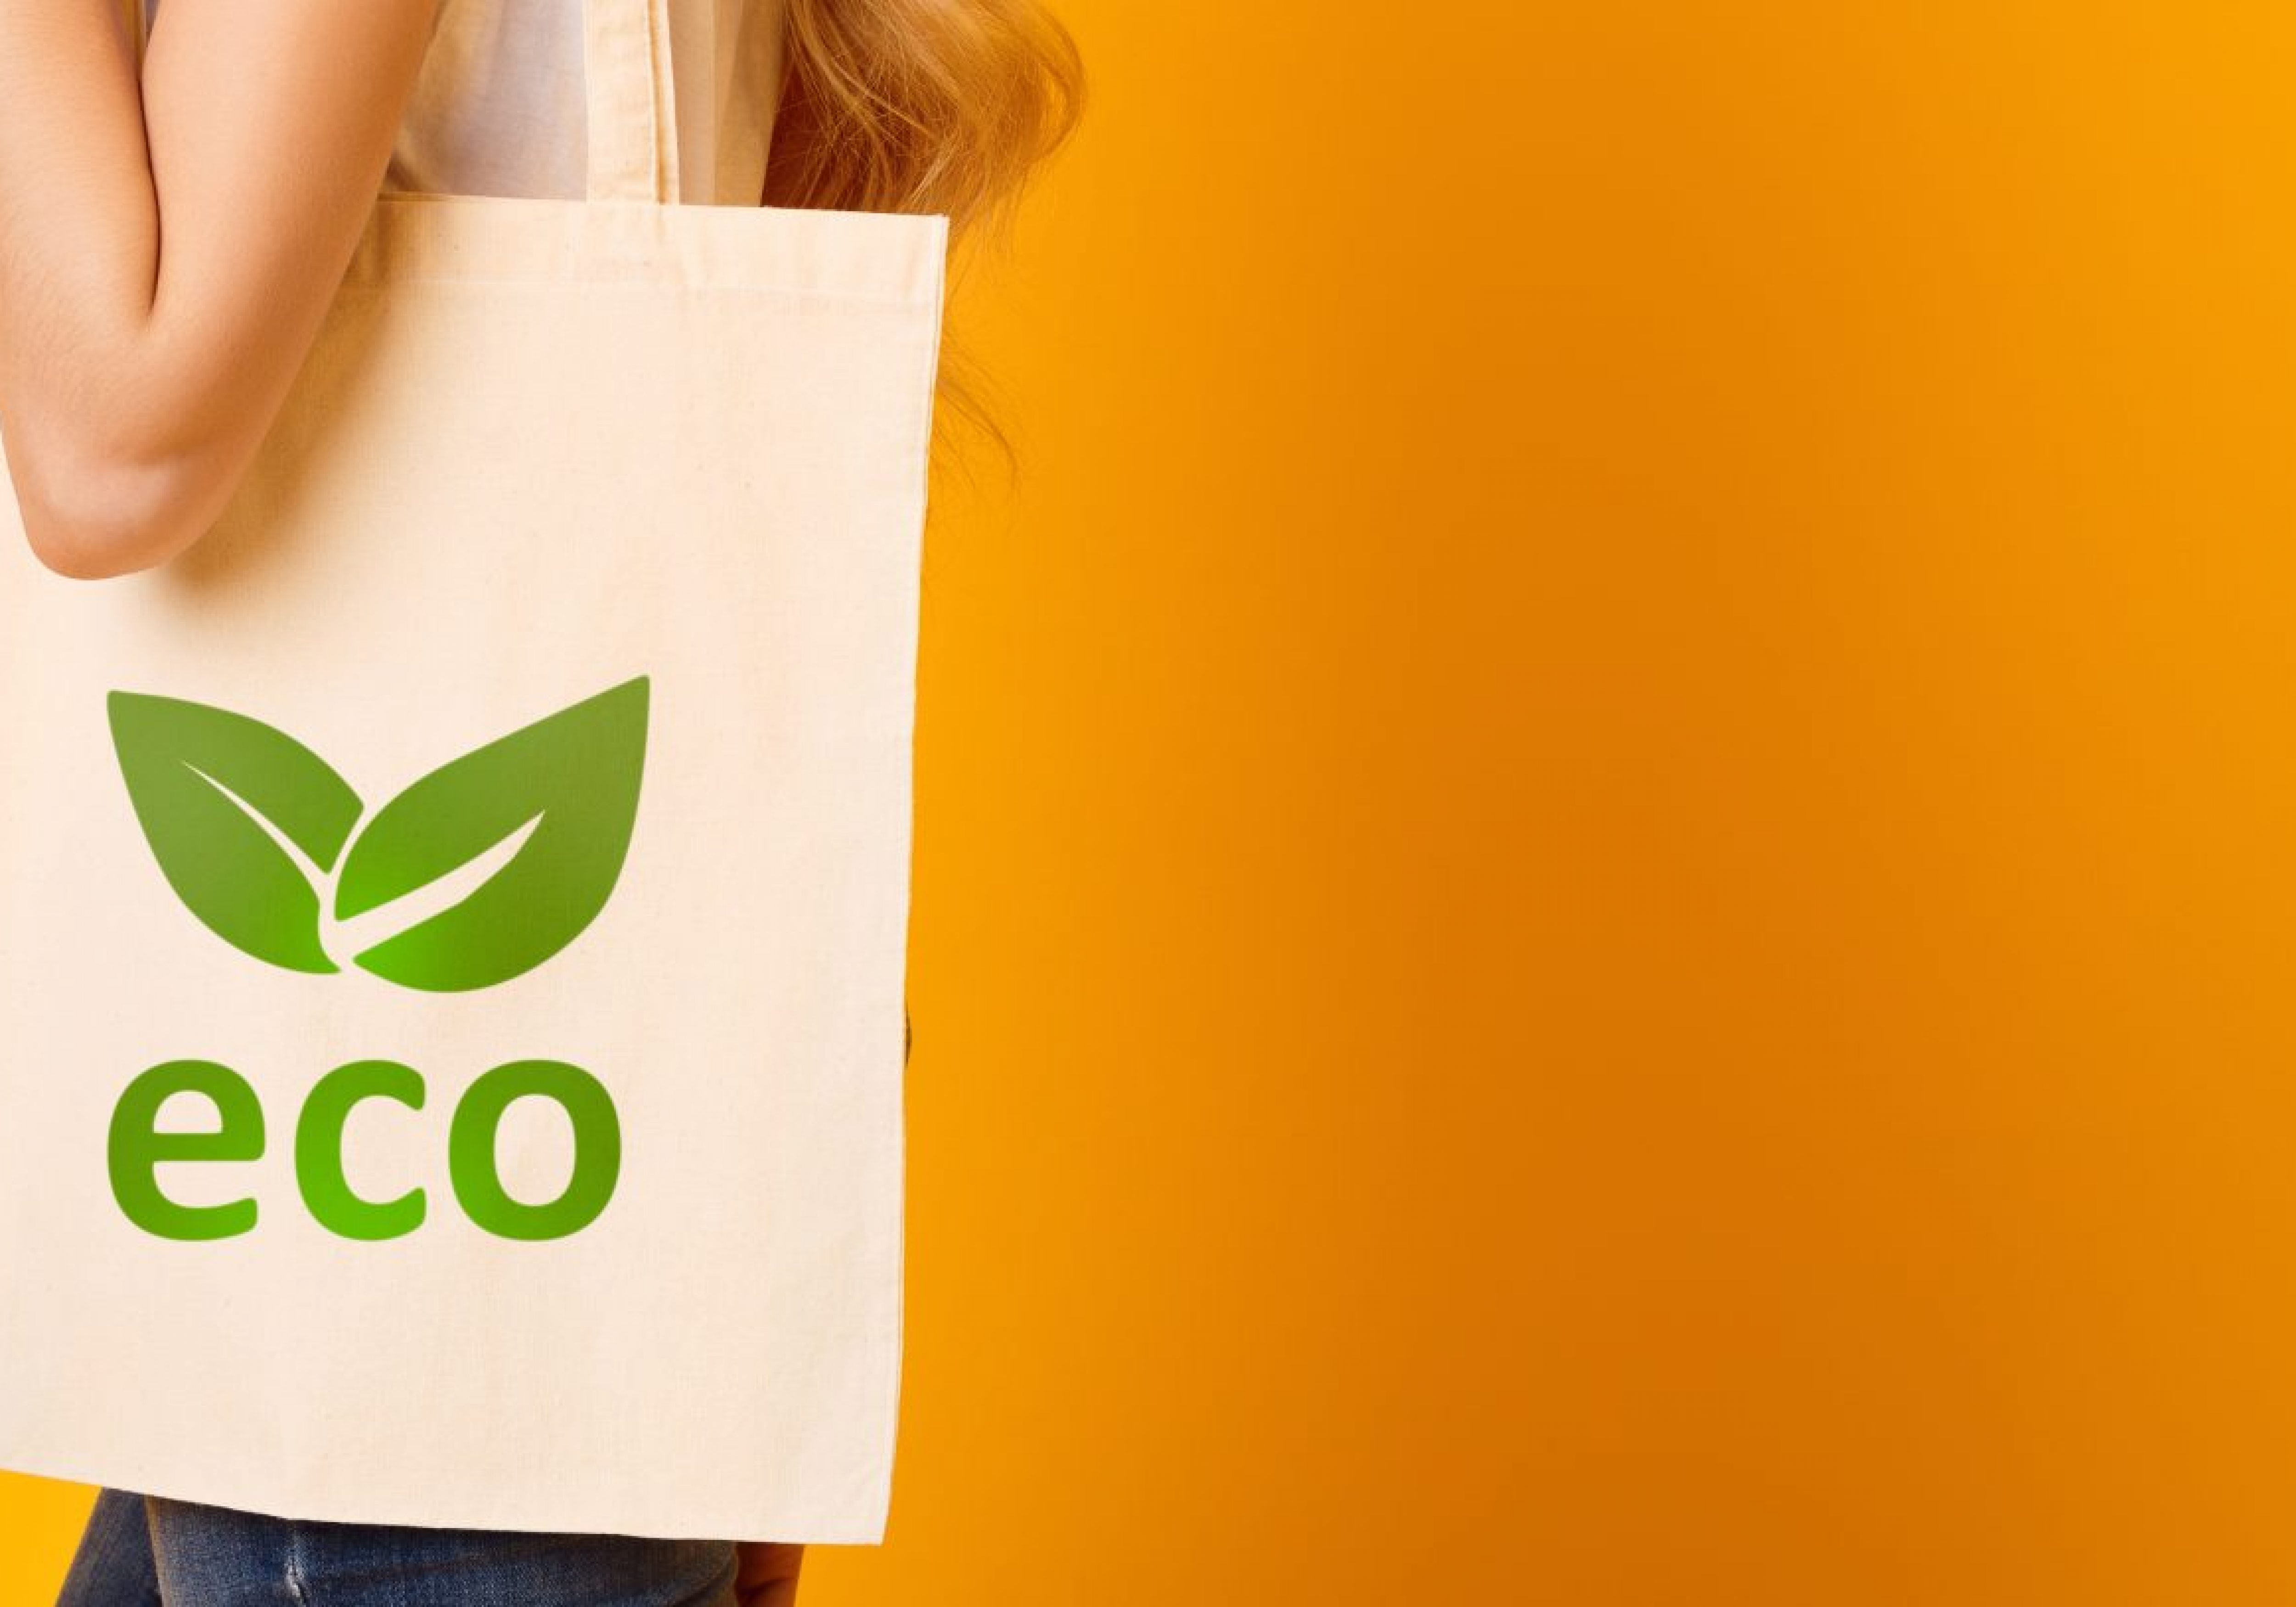 A person is carrying an eco-friendly fabric shopping bag with a green leaf logo stating 'eco'. The person is standing behind a bright solid orange background. This is symbolic to focus on being green.